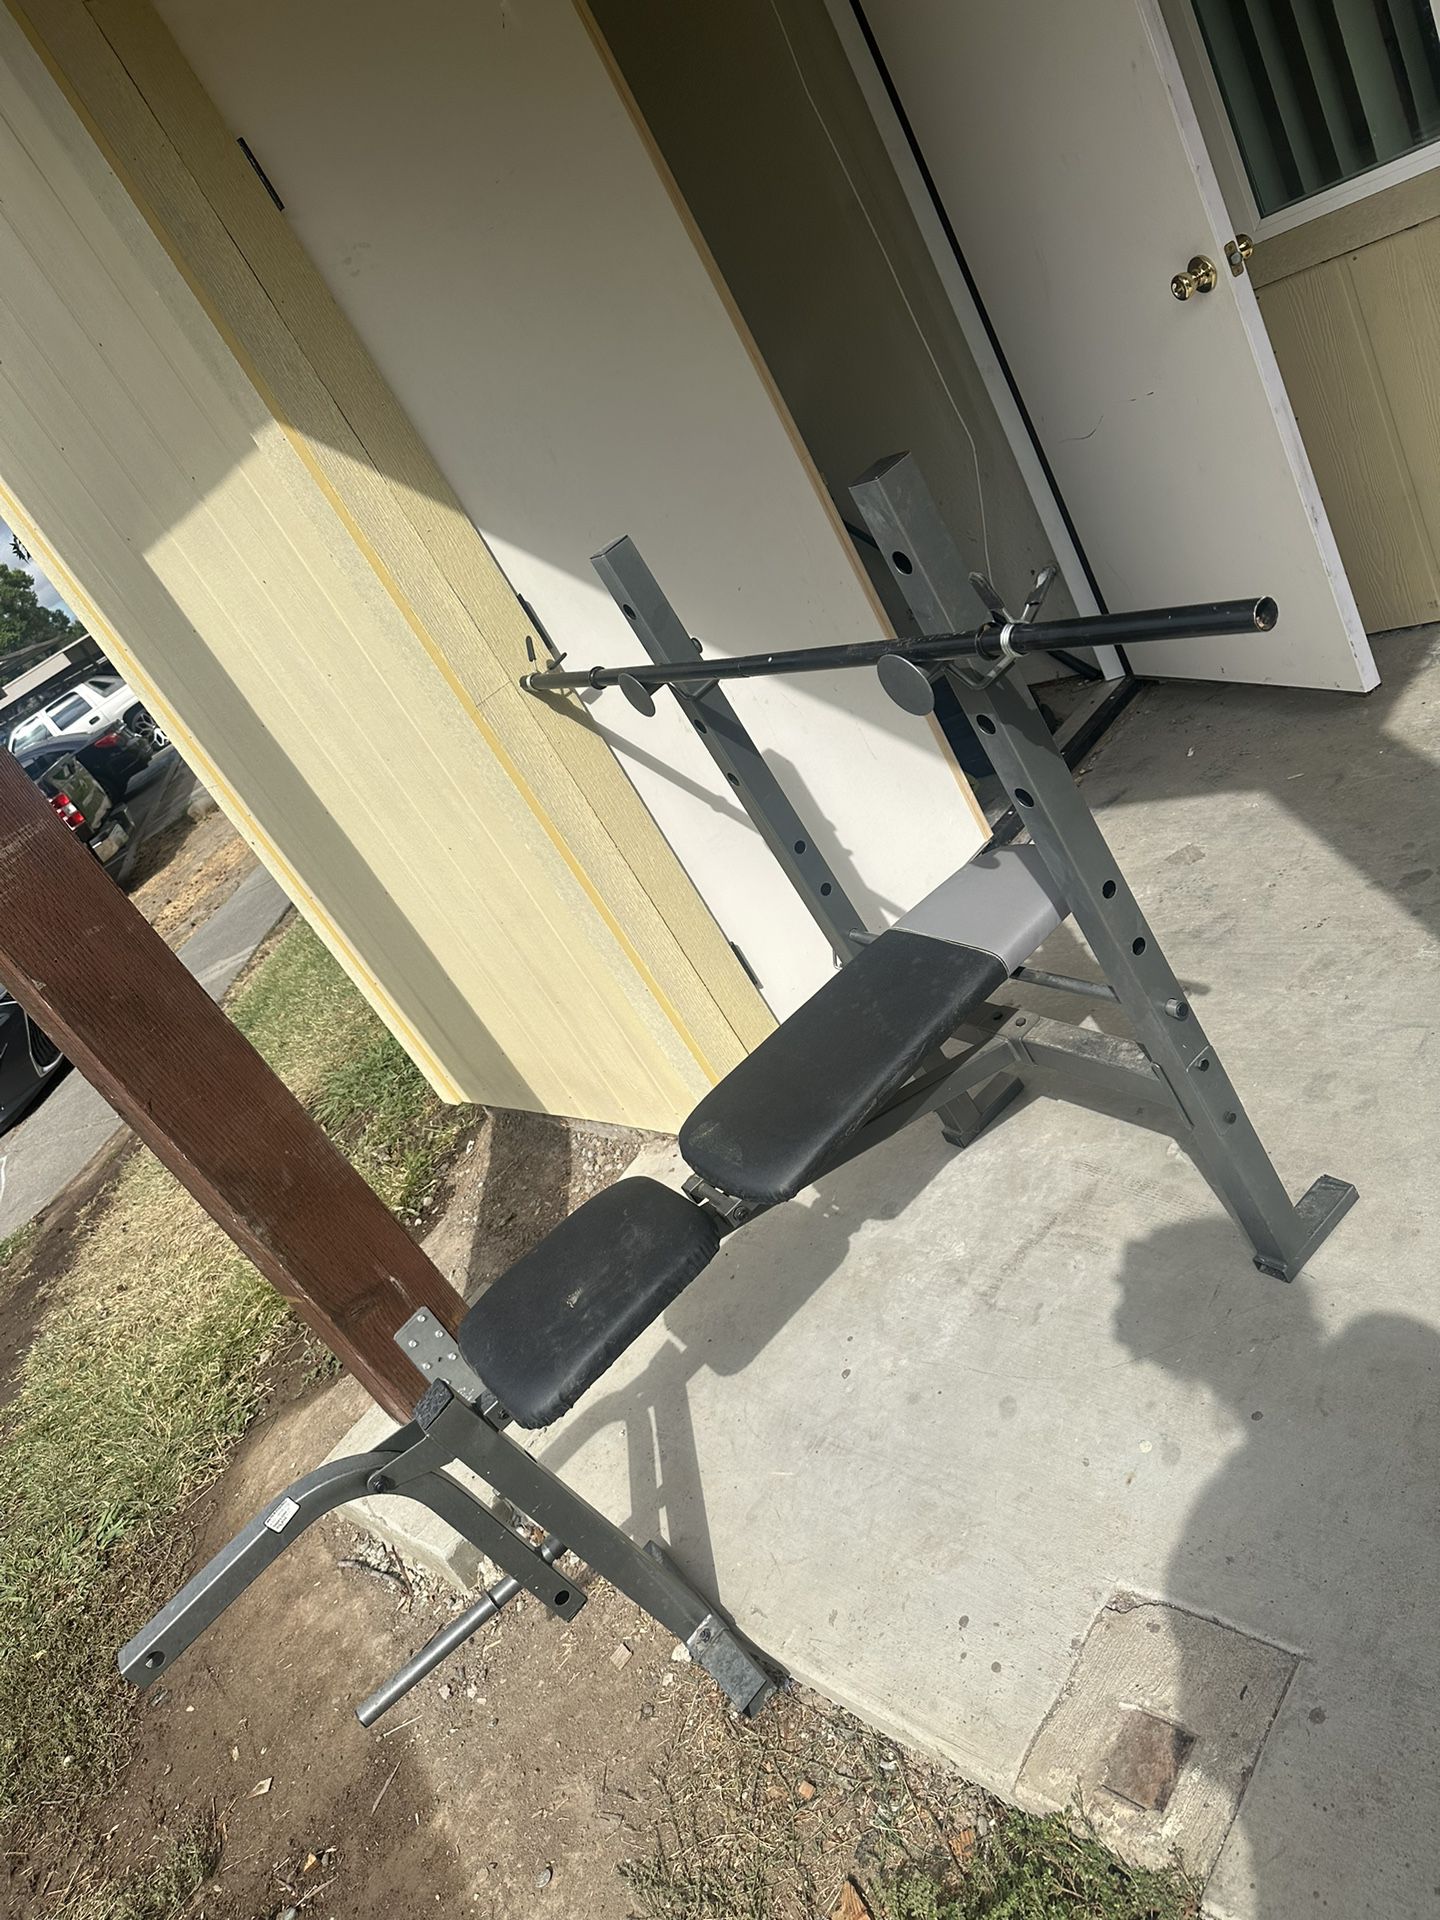 Weight Bench +Weights For Sale $200 OBO